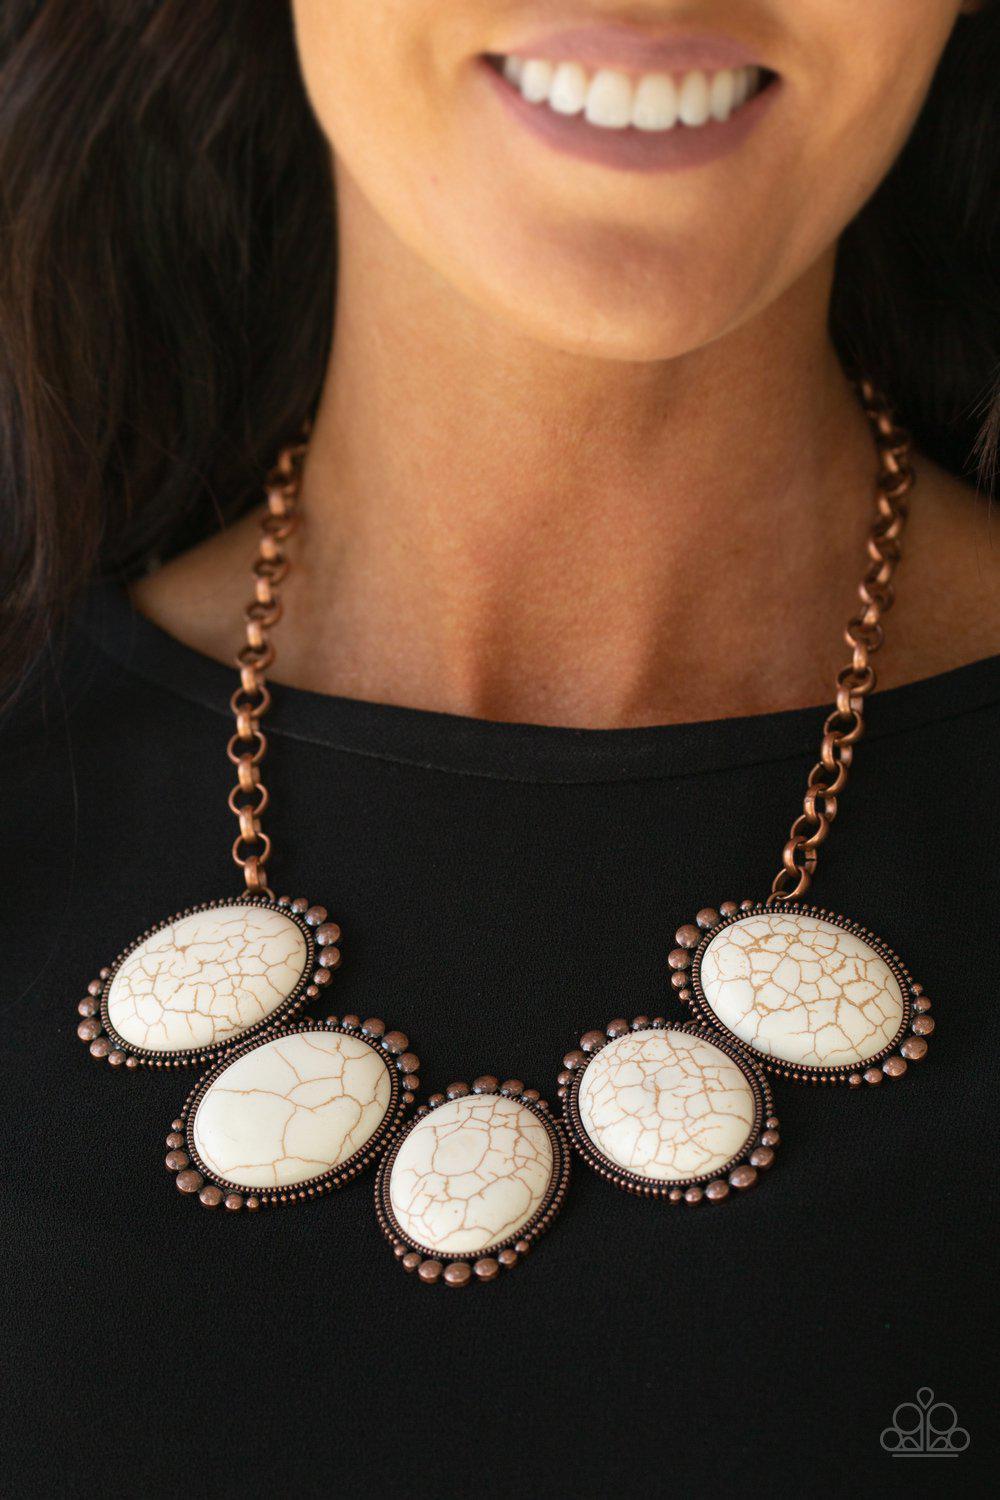 Prairie Goddess Copper and White Stone Necklace - Paparazzi Accessories- model - CarasShop.com - $5 Jewelry by Cara Jewels